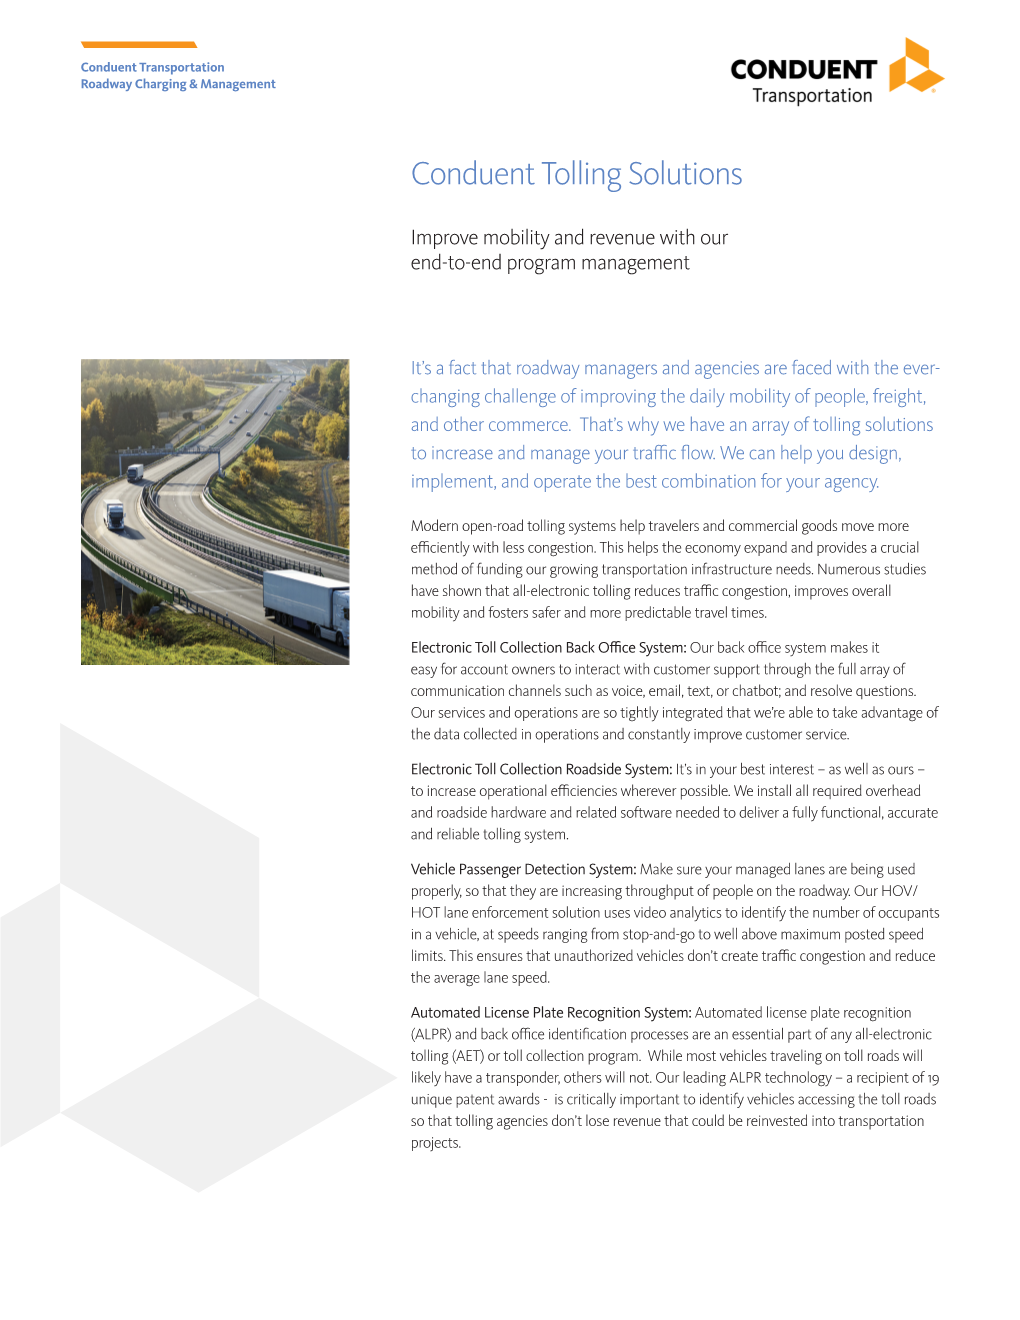 Conduent Electronic Toll Collection Systems